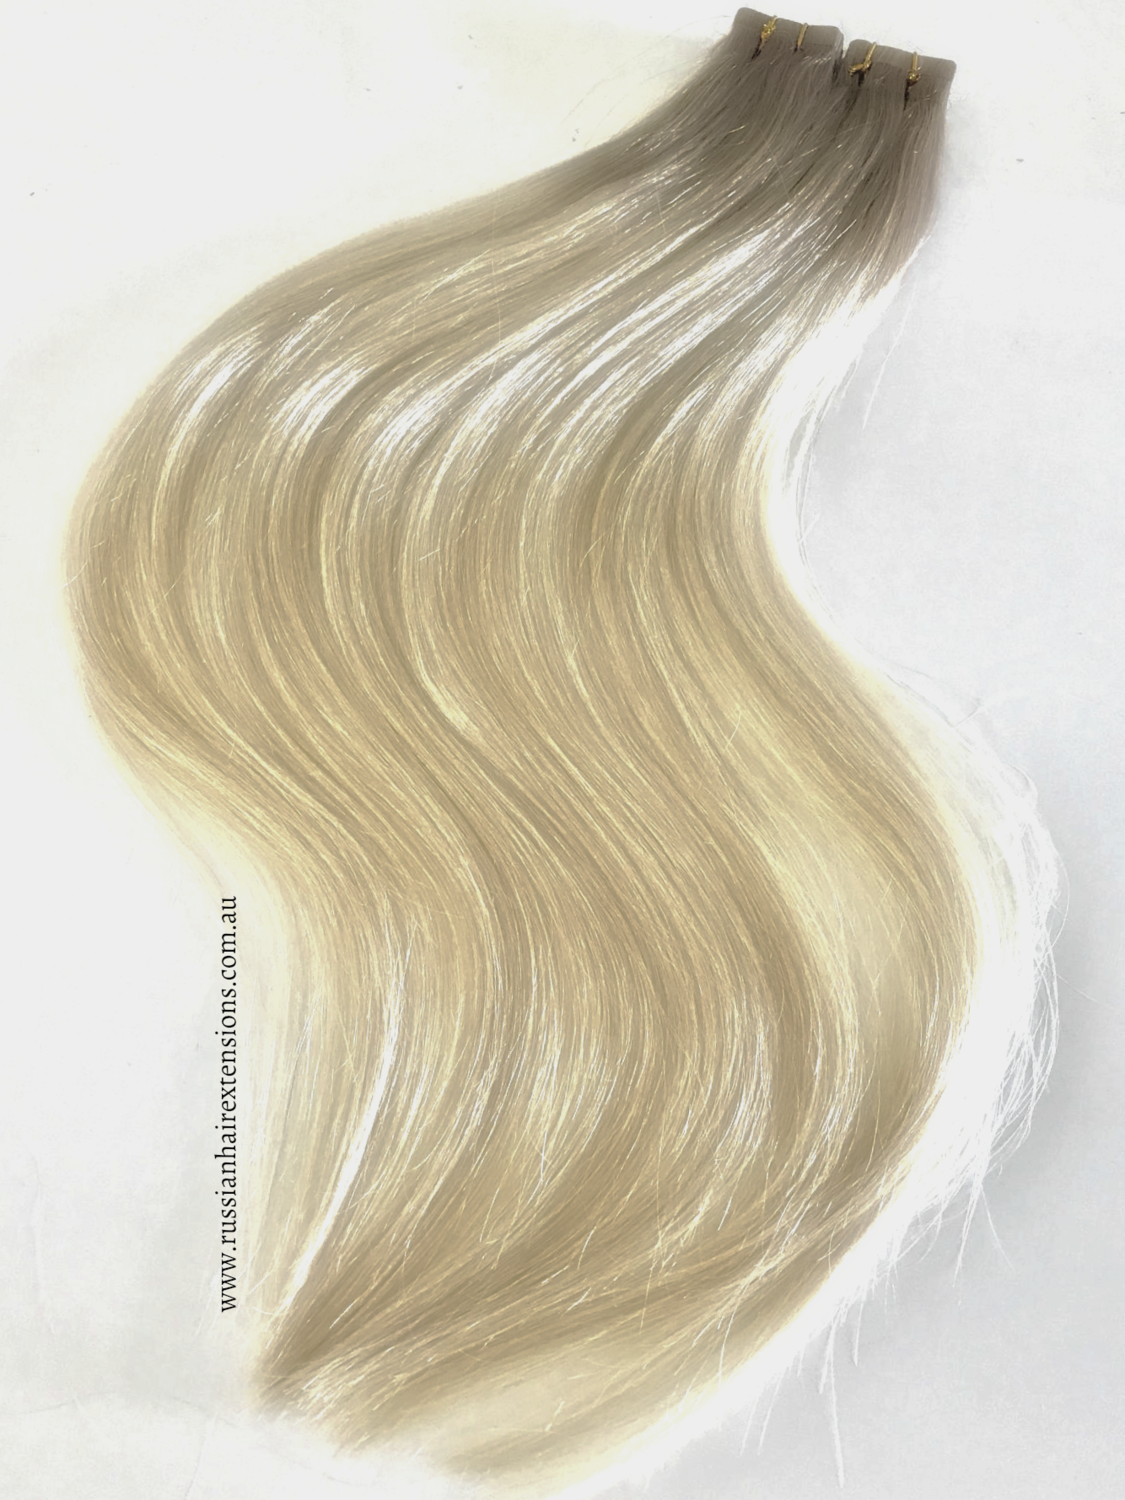 18 613 Golden Blonde Short Root Fade Balayage Golden Blonde Balayage Tape Russian 22 40 Pieces Full Head